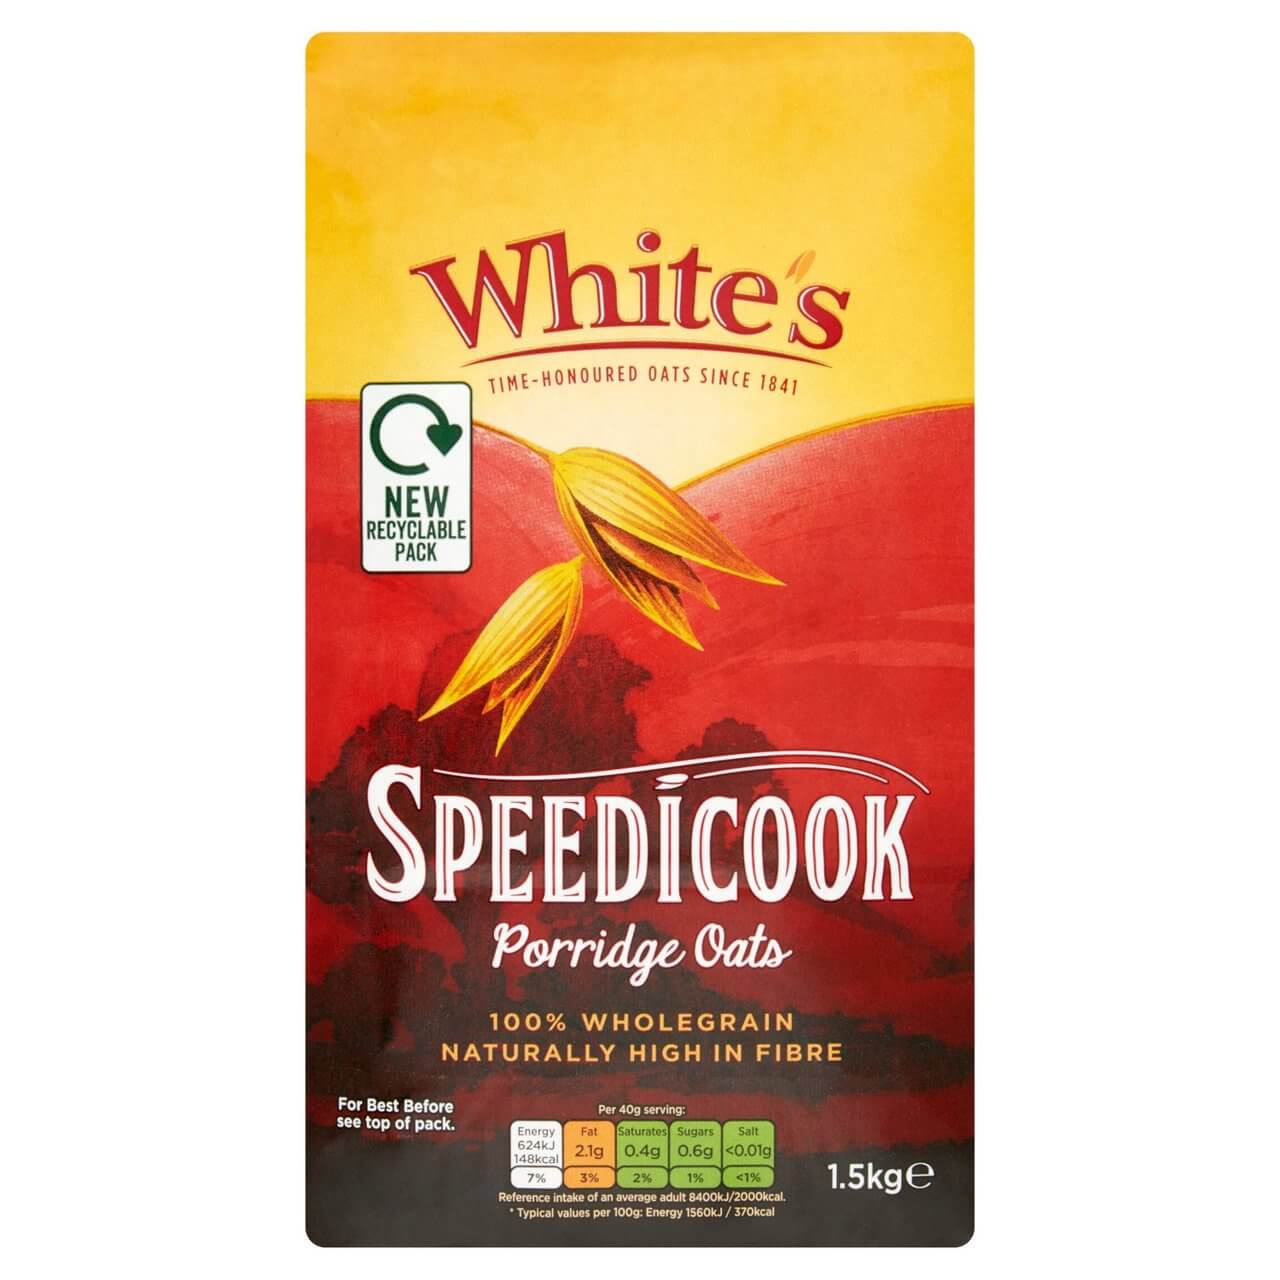 Image of White's Speedicook Porridge Oats made in the UK by White's Oats. Buying this product supports a UK business, jobs and the local community